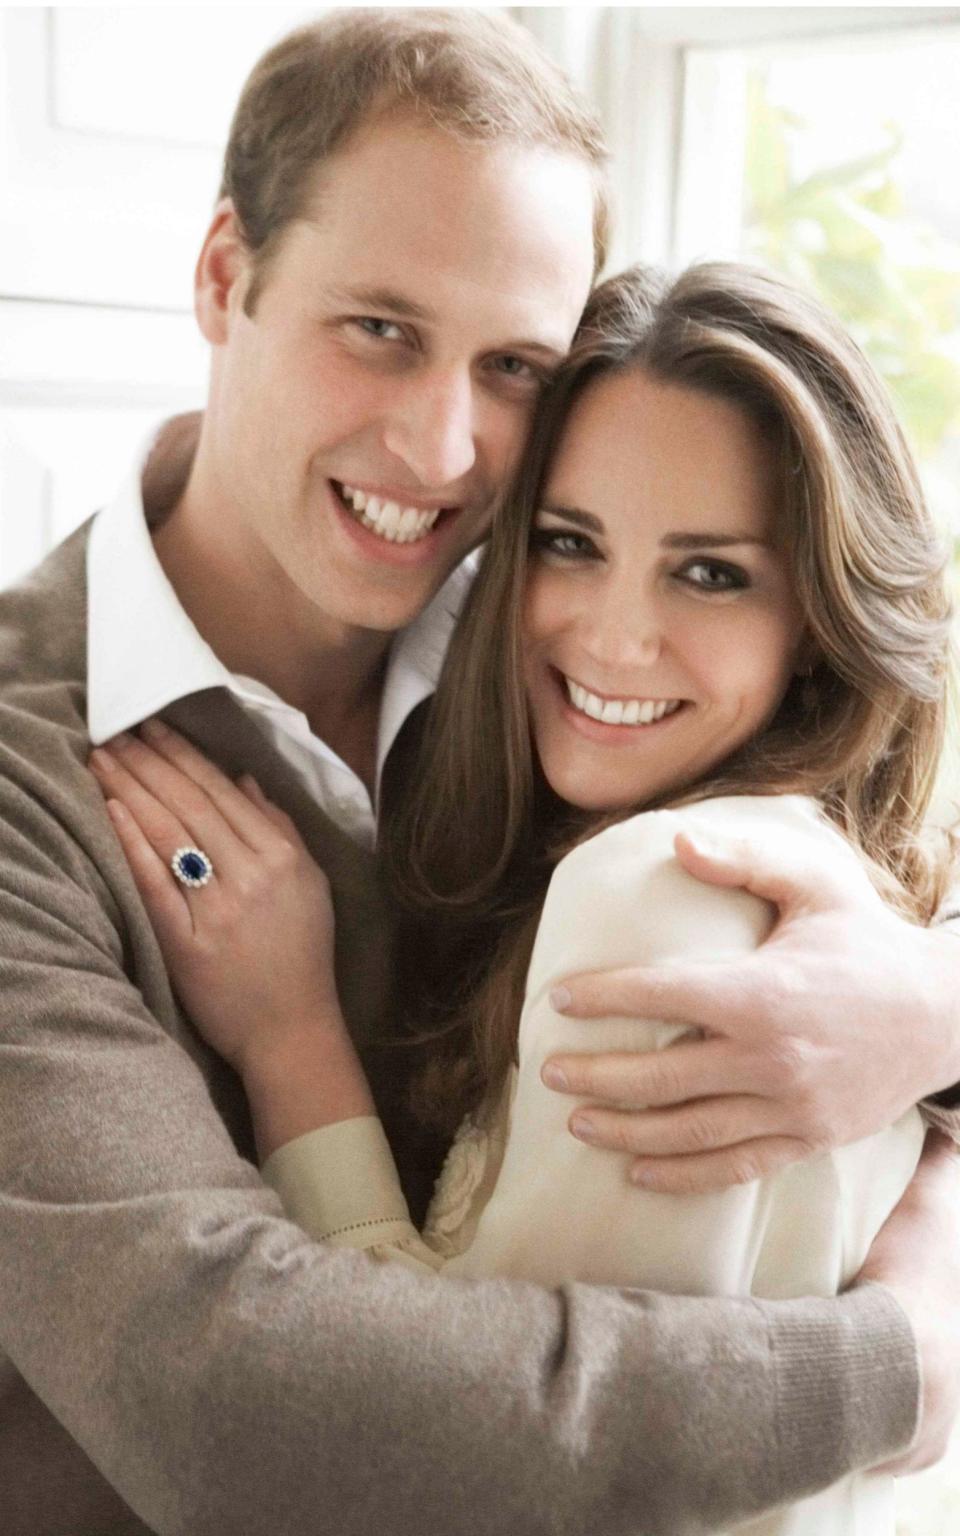 Kate Middleton wearing the sapphire and diamond Garrard ring that previously belonged to Princess Diana, in the official engagement portrait with Prince William - Mario Testino 